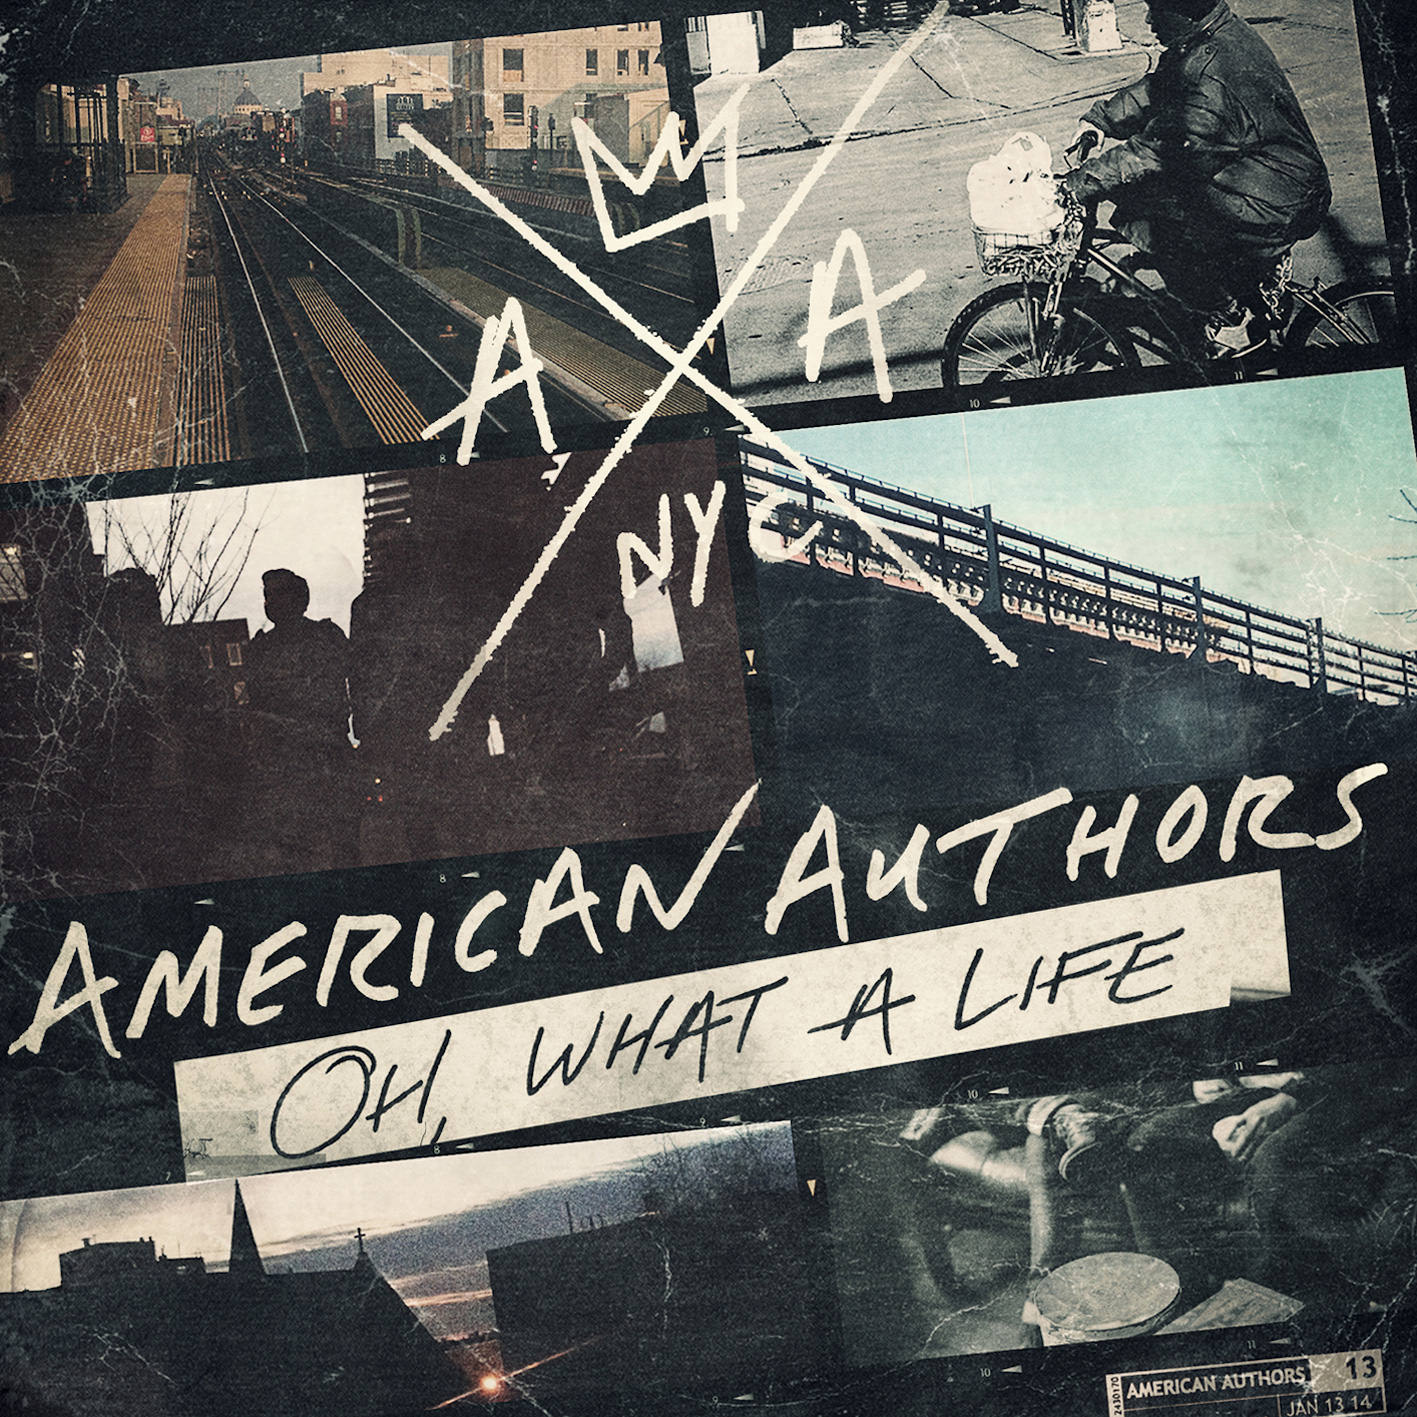 American Authors - Oh, What A Life (2014) [HDTracks FLAC 24bit/44,1kHz]